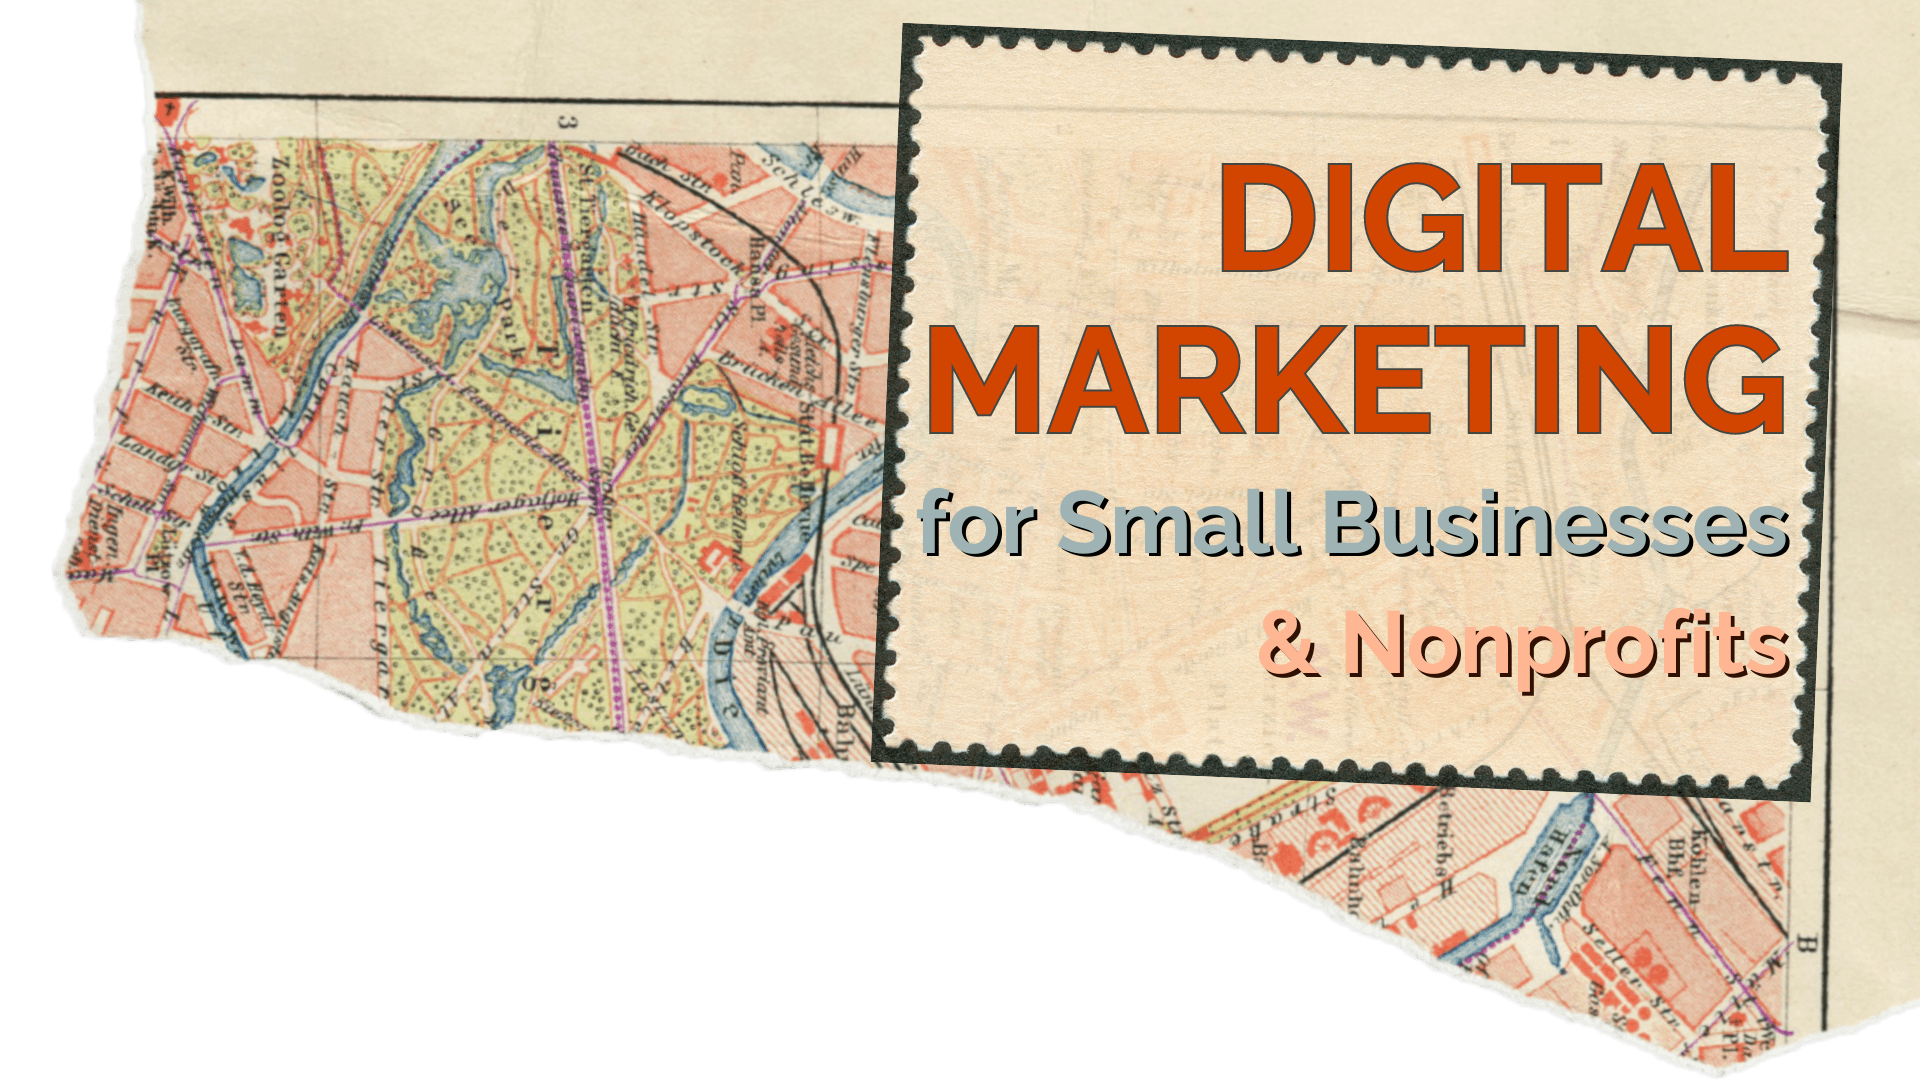 Digital Marketing for Small Businesses and Nonprofits